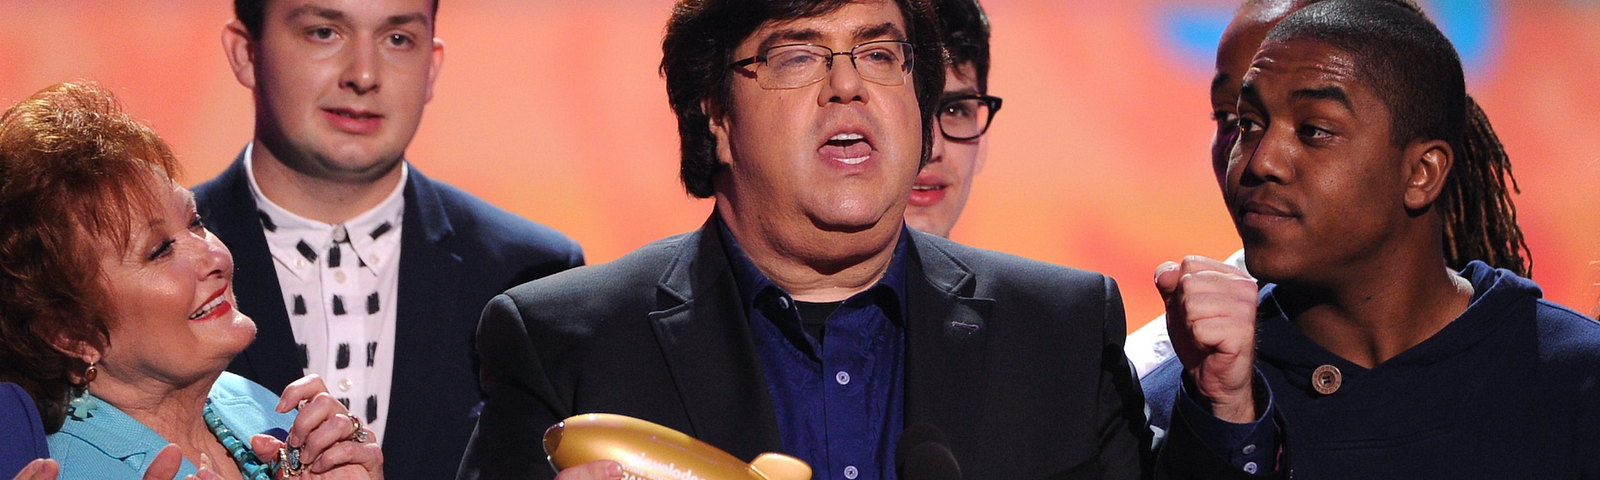 “Look, I didn’t promote a culture of child sexual abuse!” Dan Schneider of Nickelodeon said. “I’m not a successful black music producer. That’s proof that I’m innocent!”